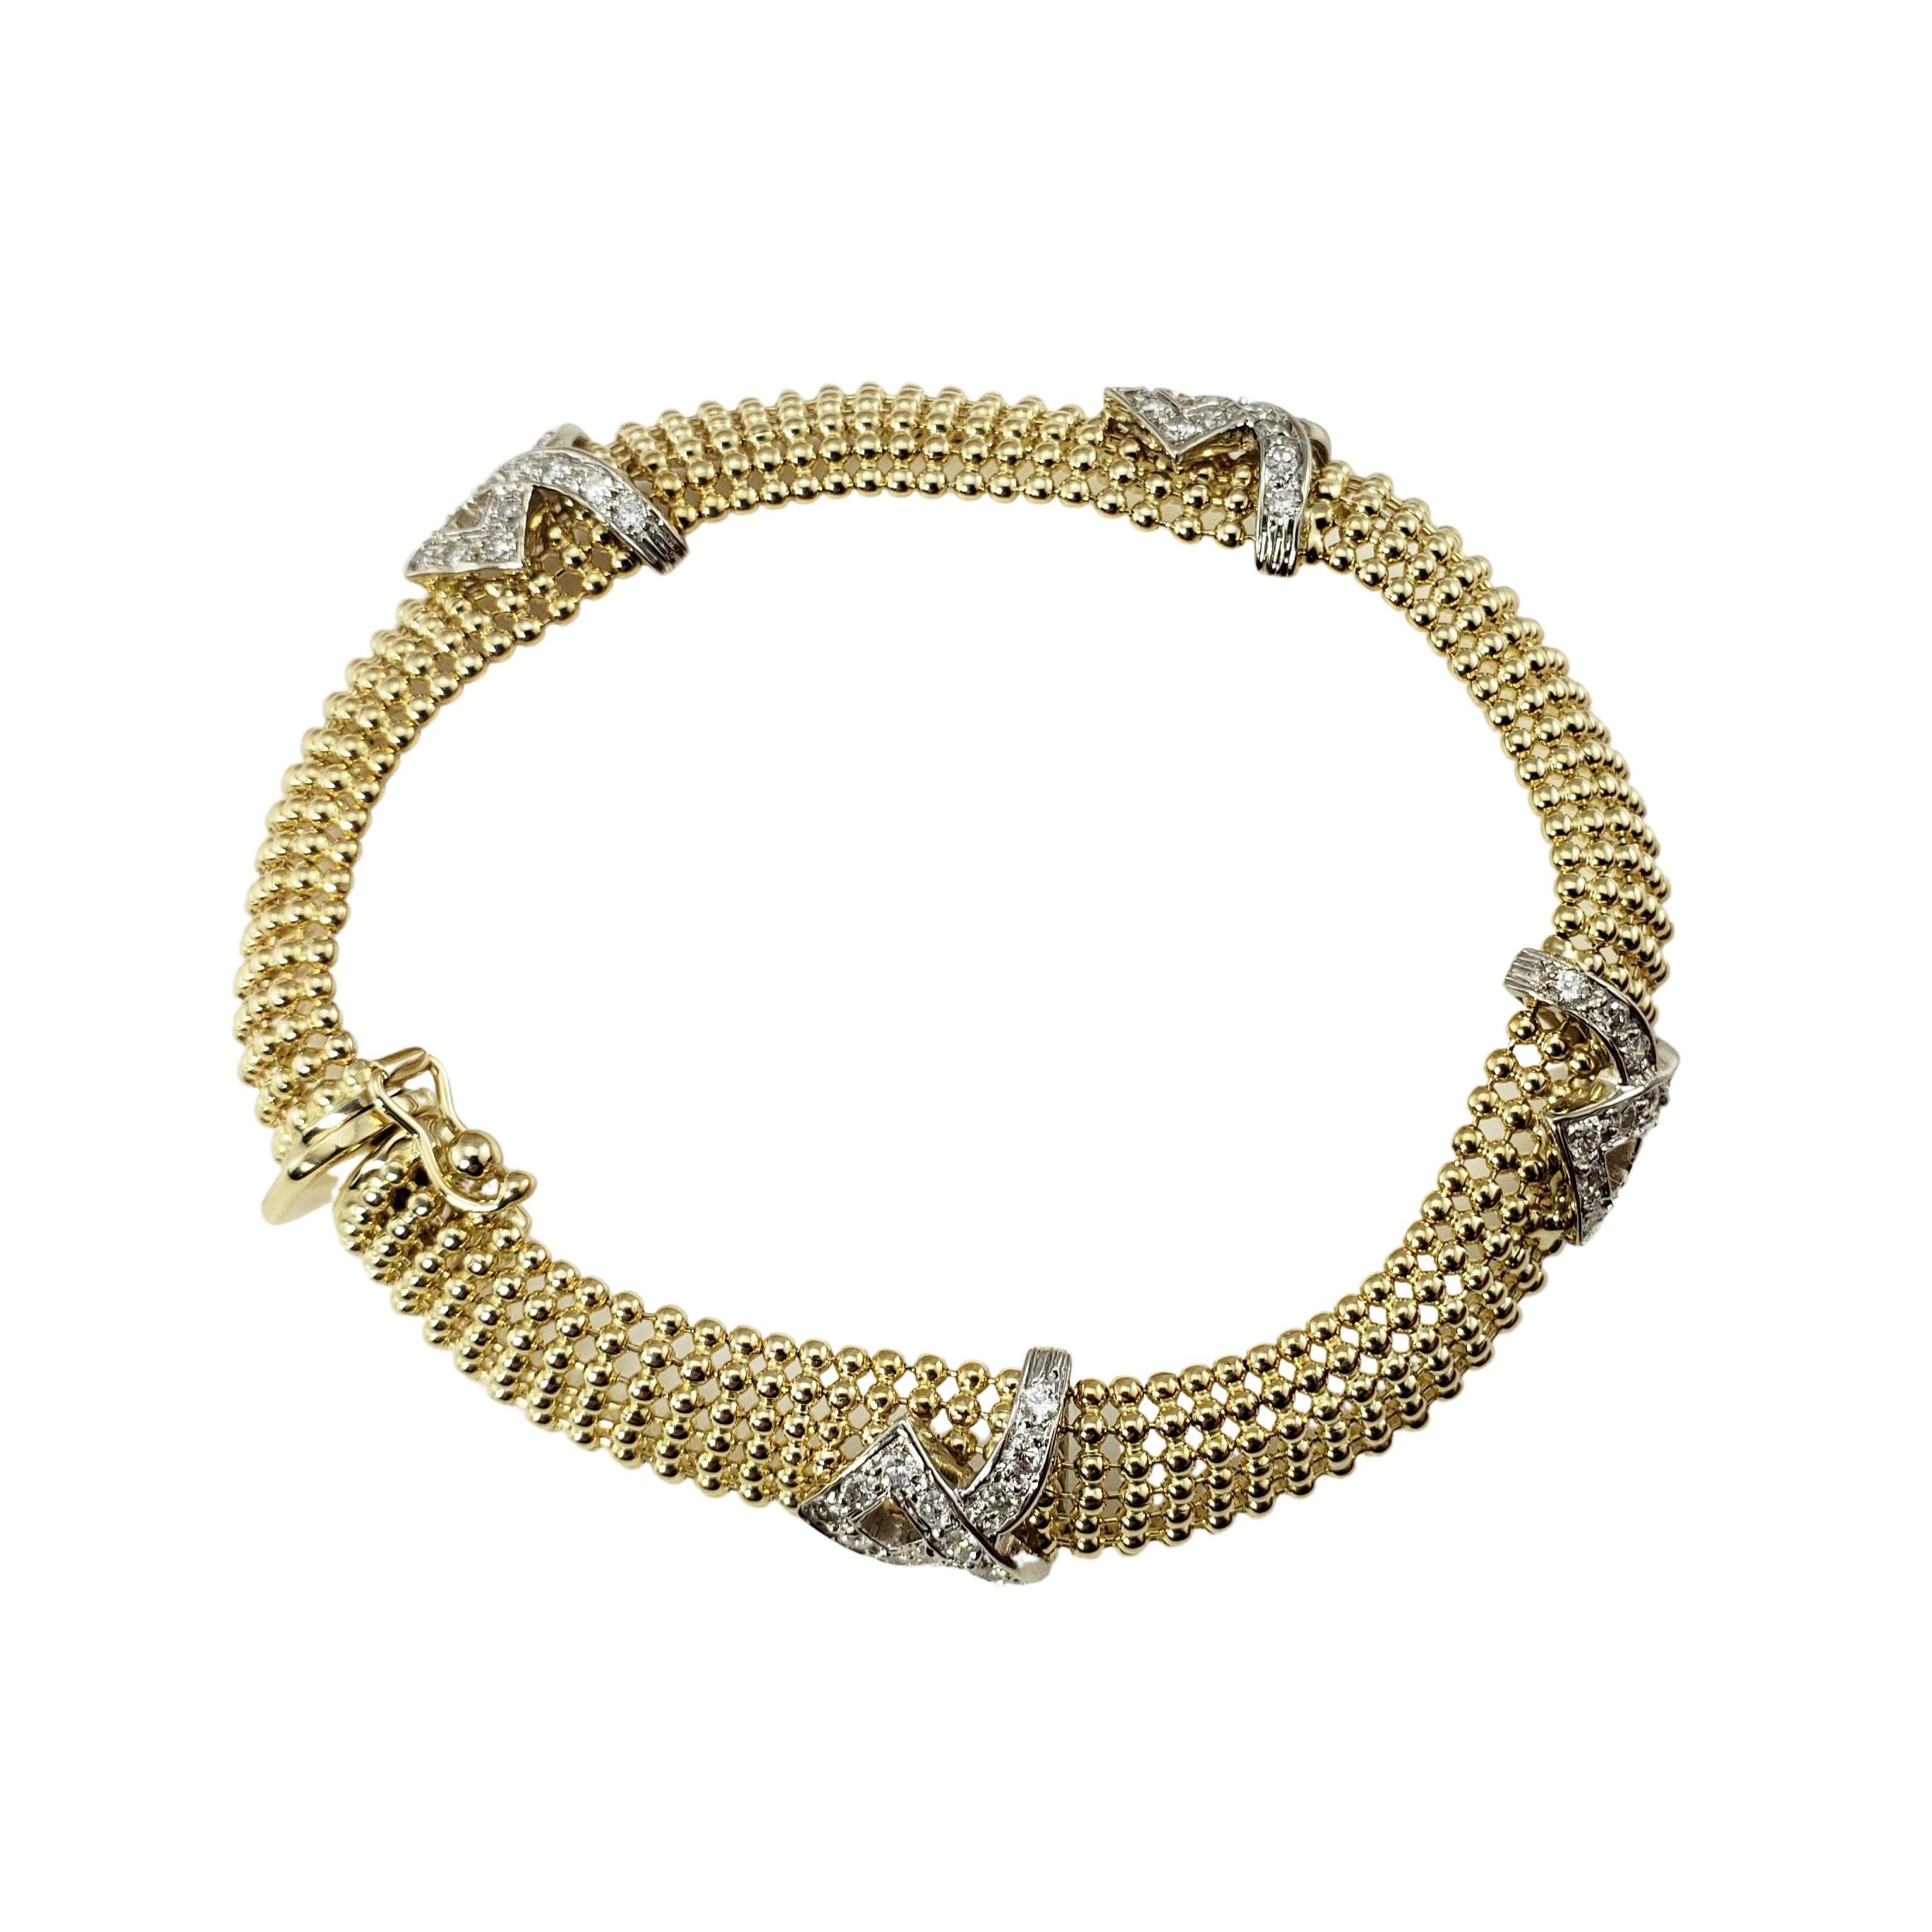 14 Karat Yellow Gold and Diamond Mesh Bracelet-

This stunning mesh bracelet features 56 round brilliant cut diamonds set in beautifully detailed 14K yellow gold.  Width:  12 mm.

Approximate total diamond weight: .96 ct.

Diamond color: